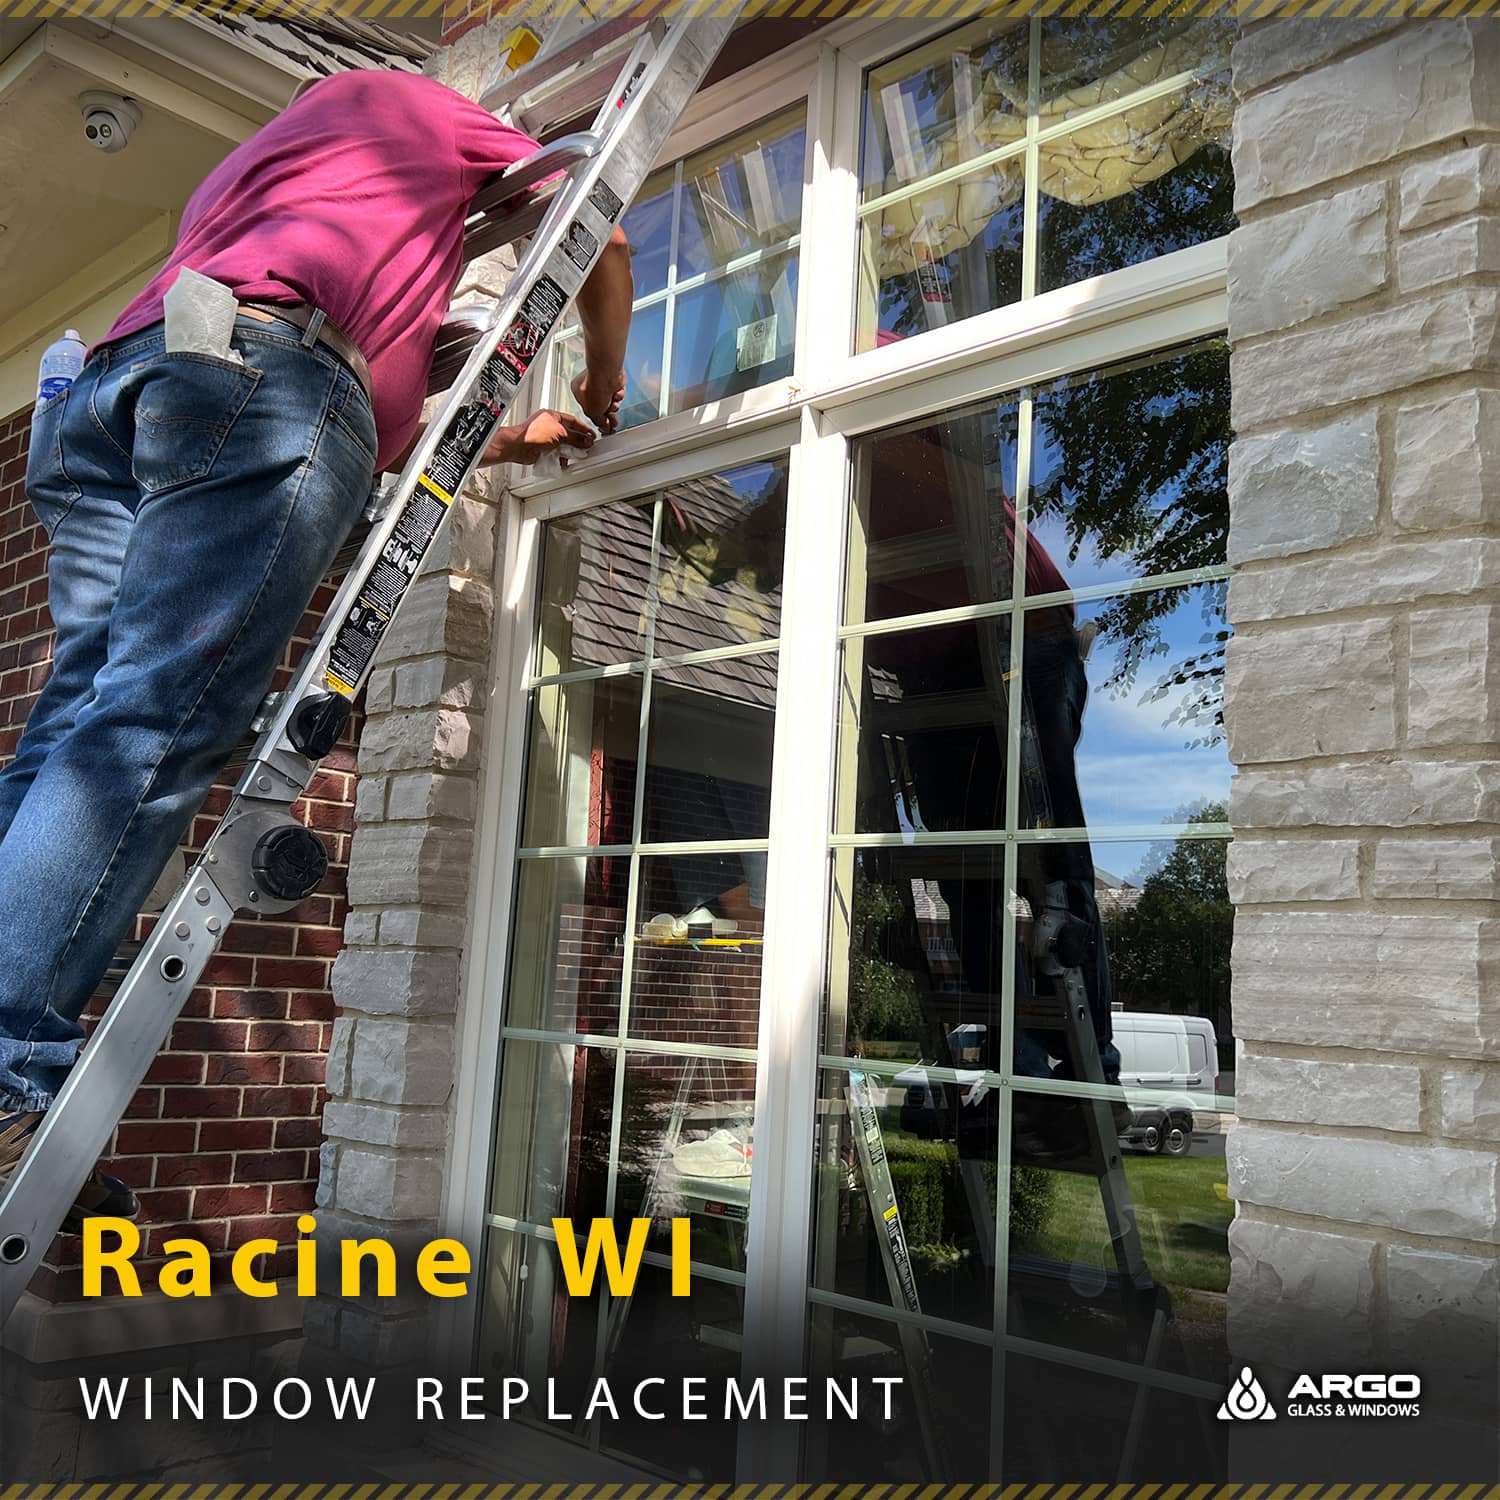 Professional Window Replacement company